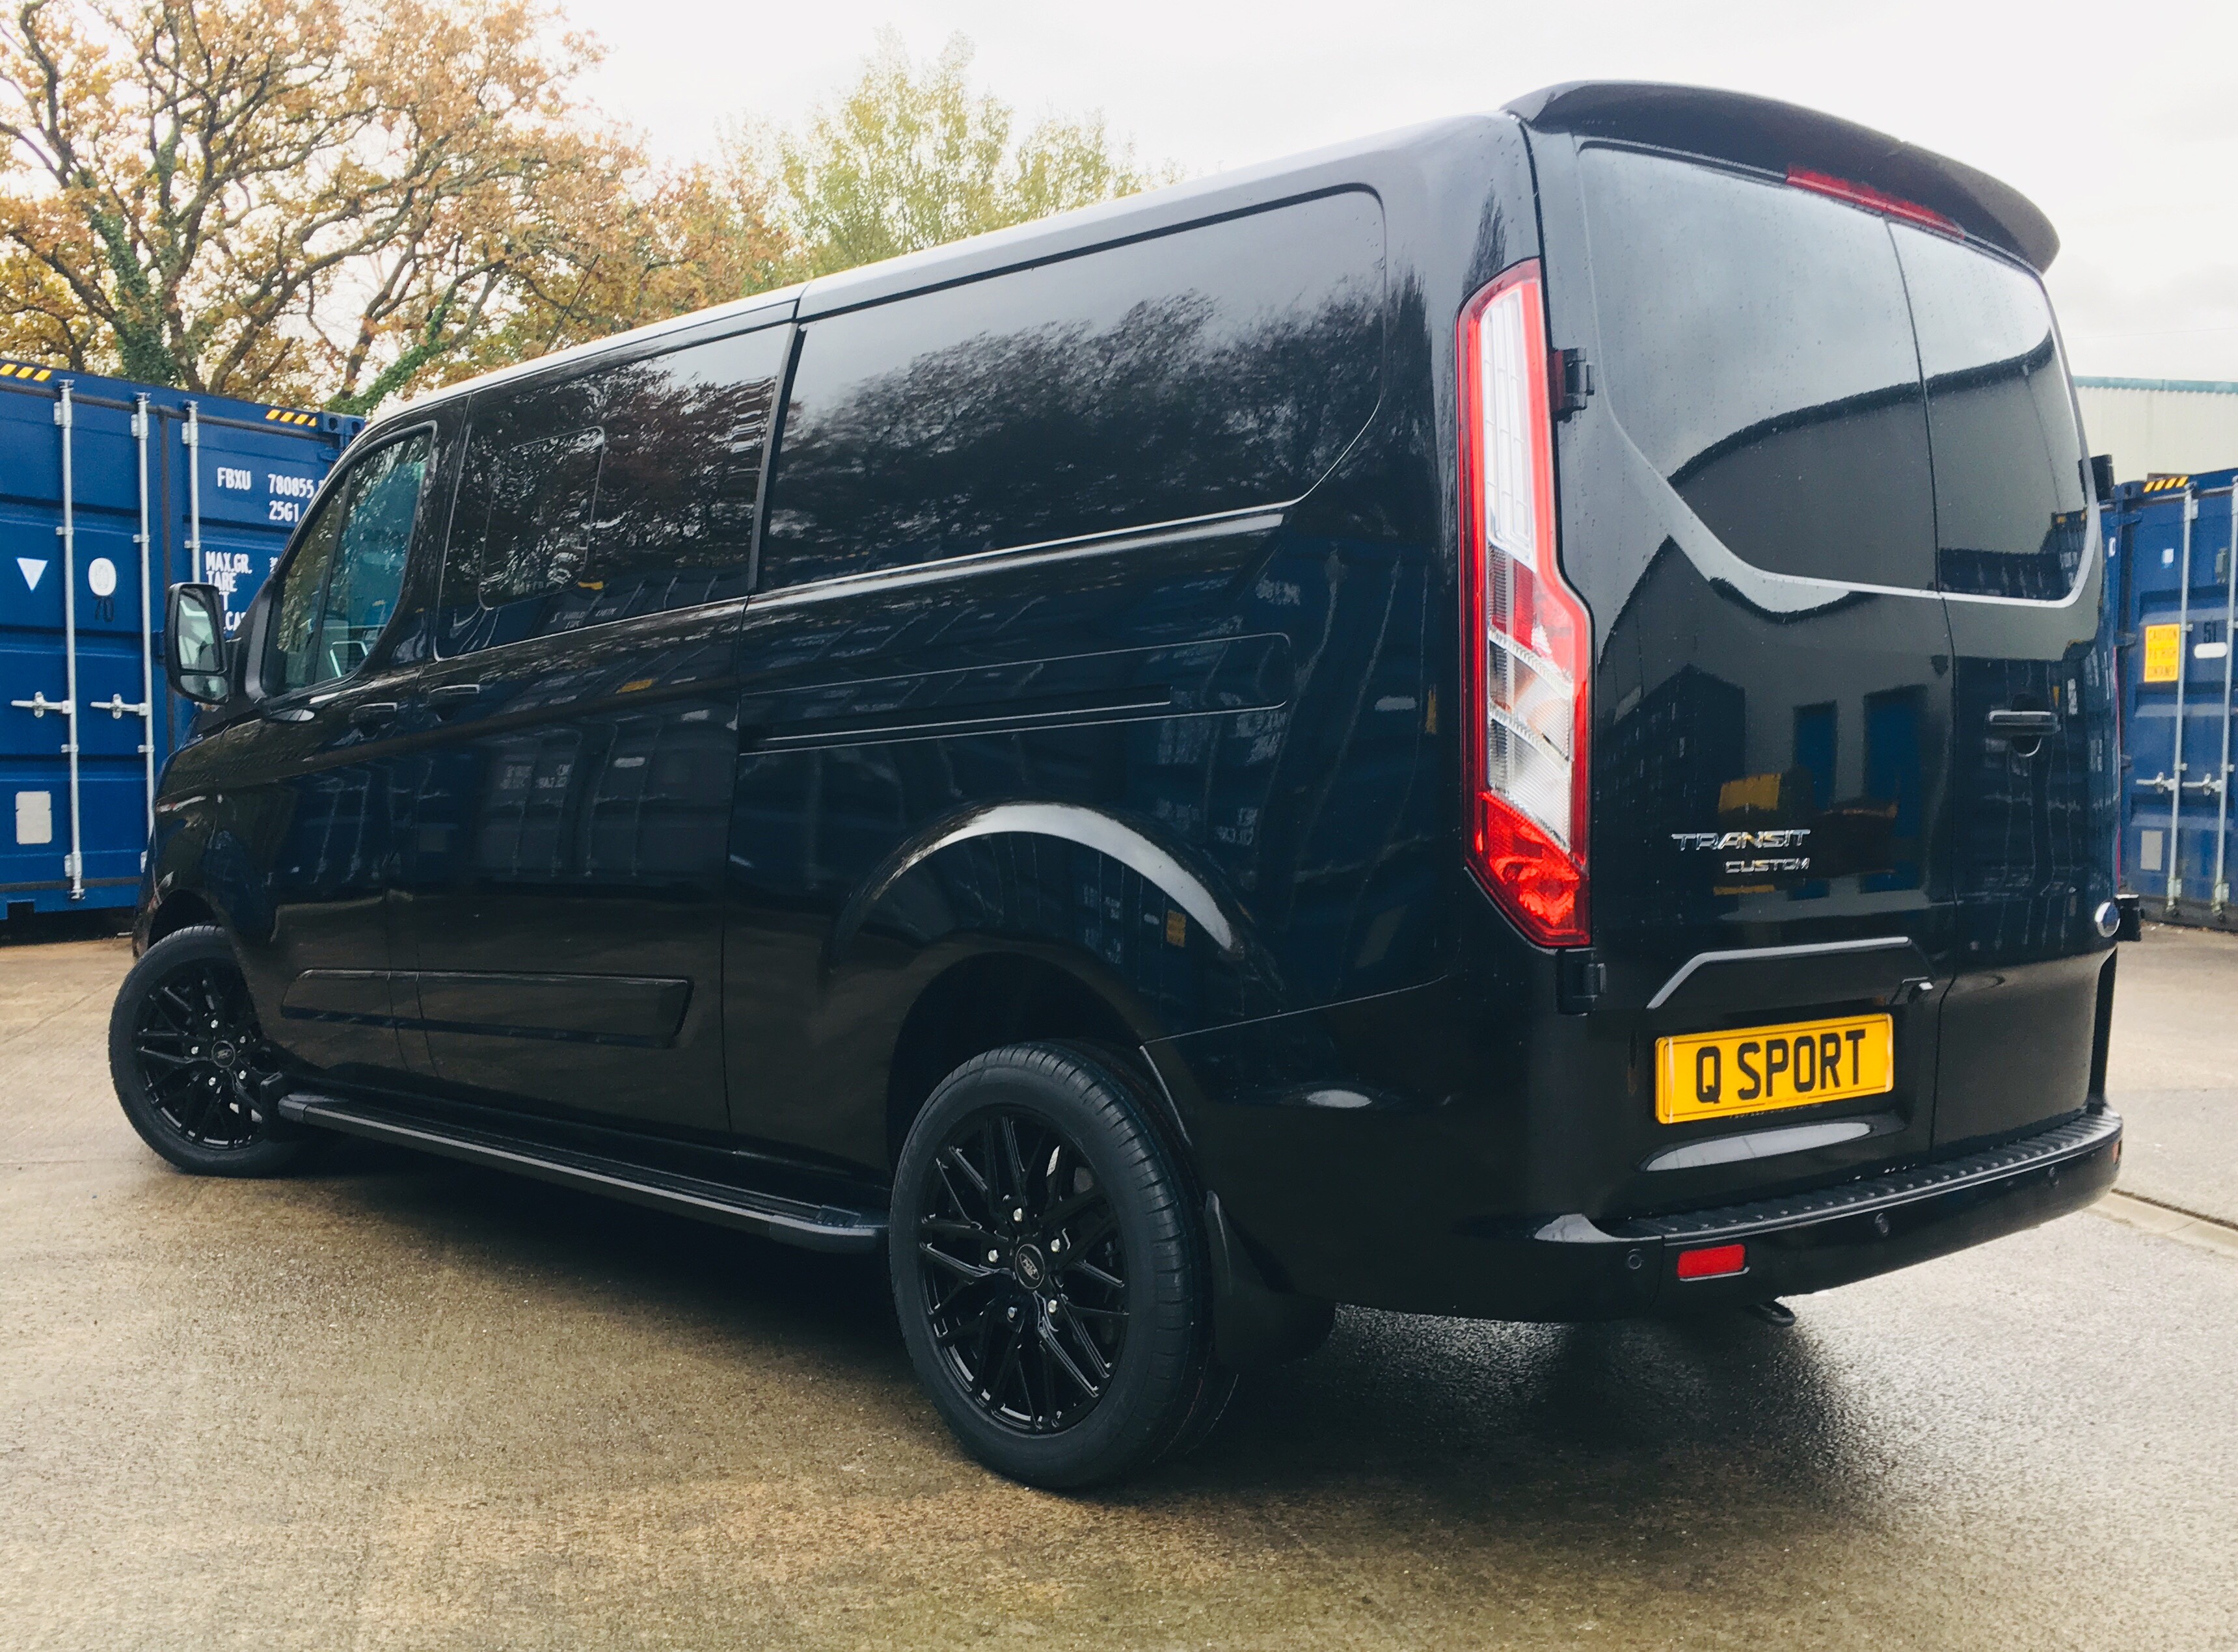 Ford Transit Custom Q Sport with Ford Grille - left view - Quadrant Vehicles